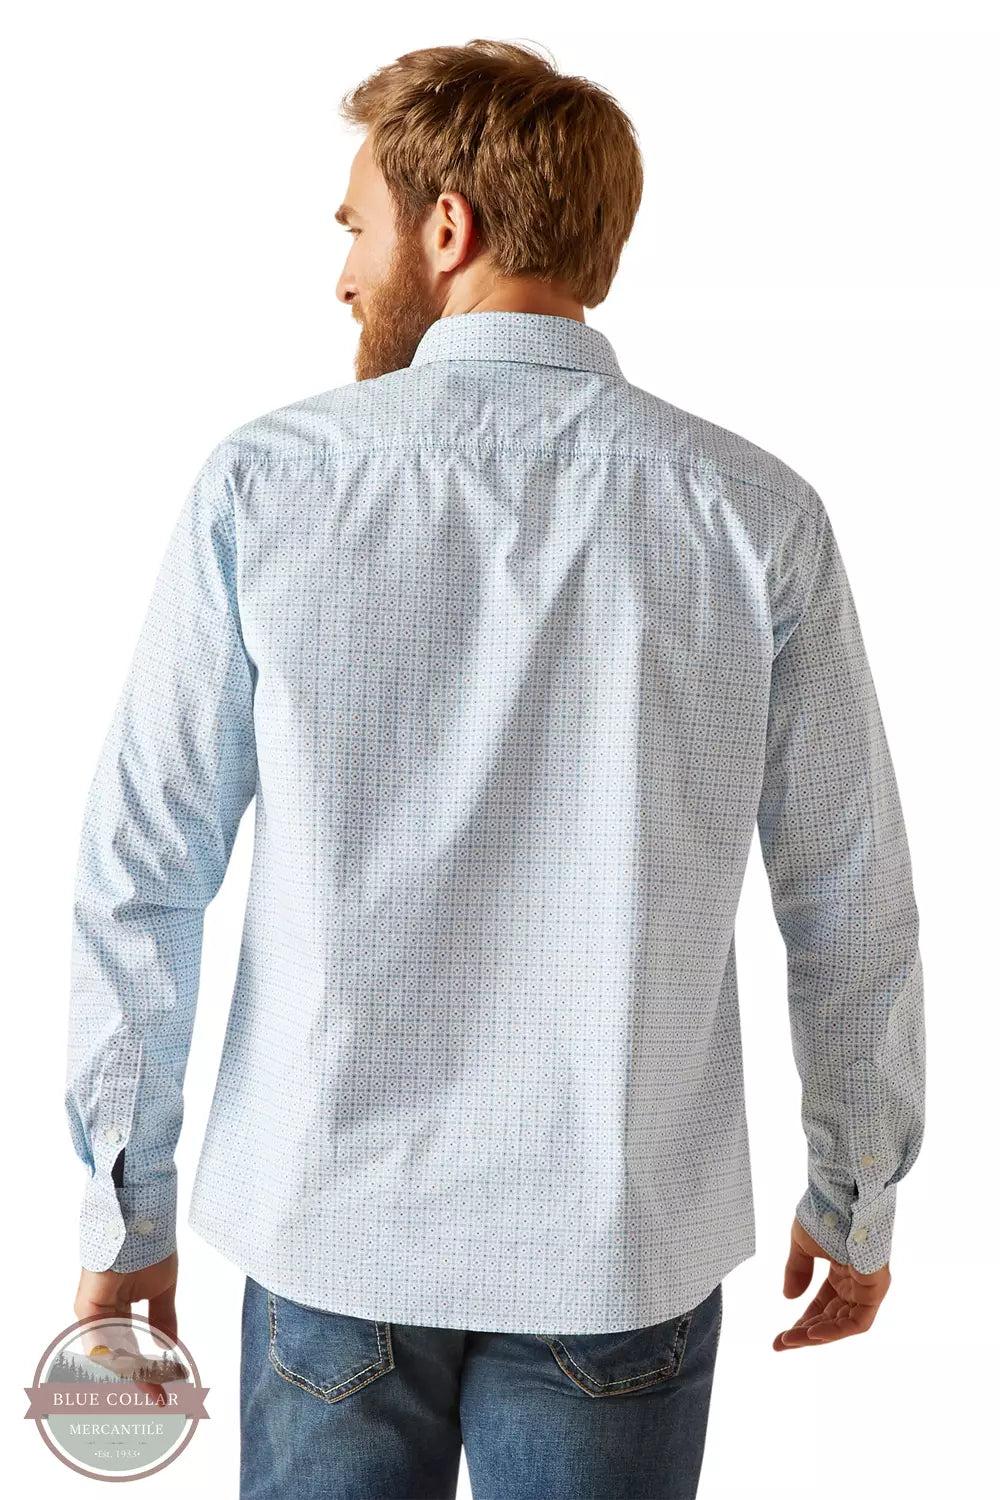 Ariat 10047420 Madden Stretch Modern Fit Long Sleeve Shirt in White Print Back View